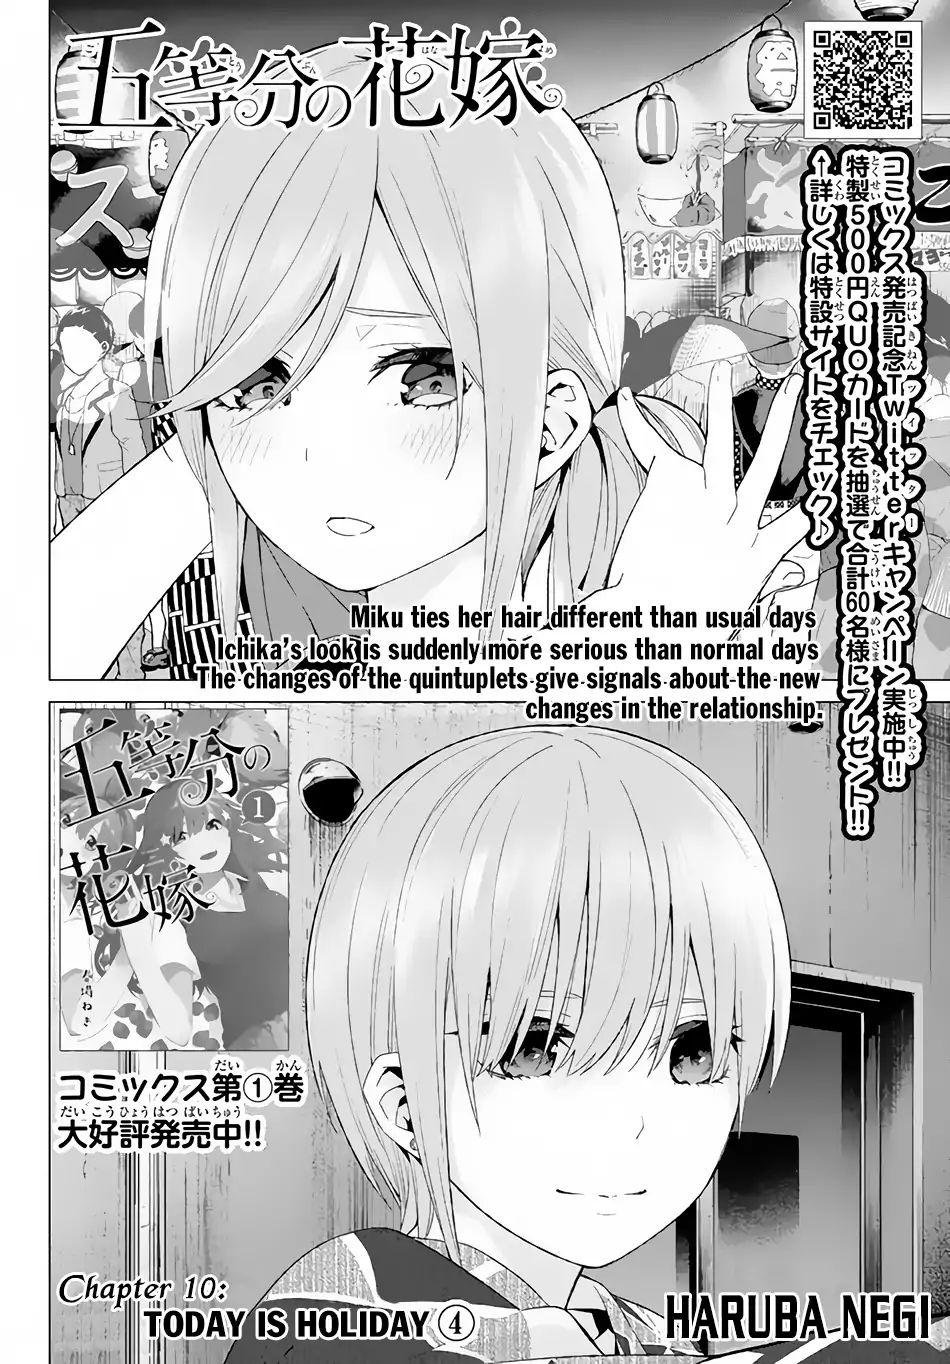 Go-Toubun No Hanayome Vol.2 Chapter 10: Today Is Holiday (4) - Picture 3